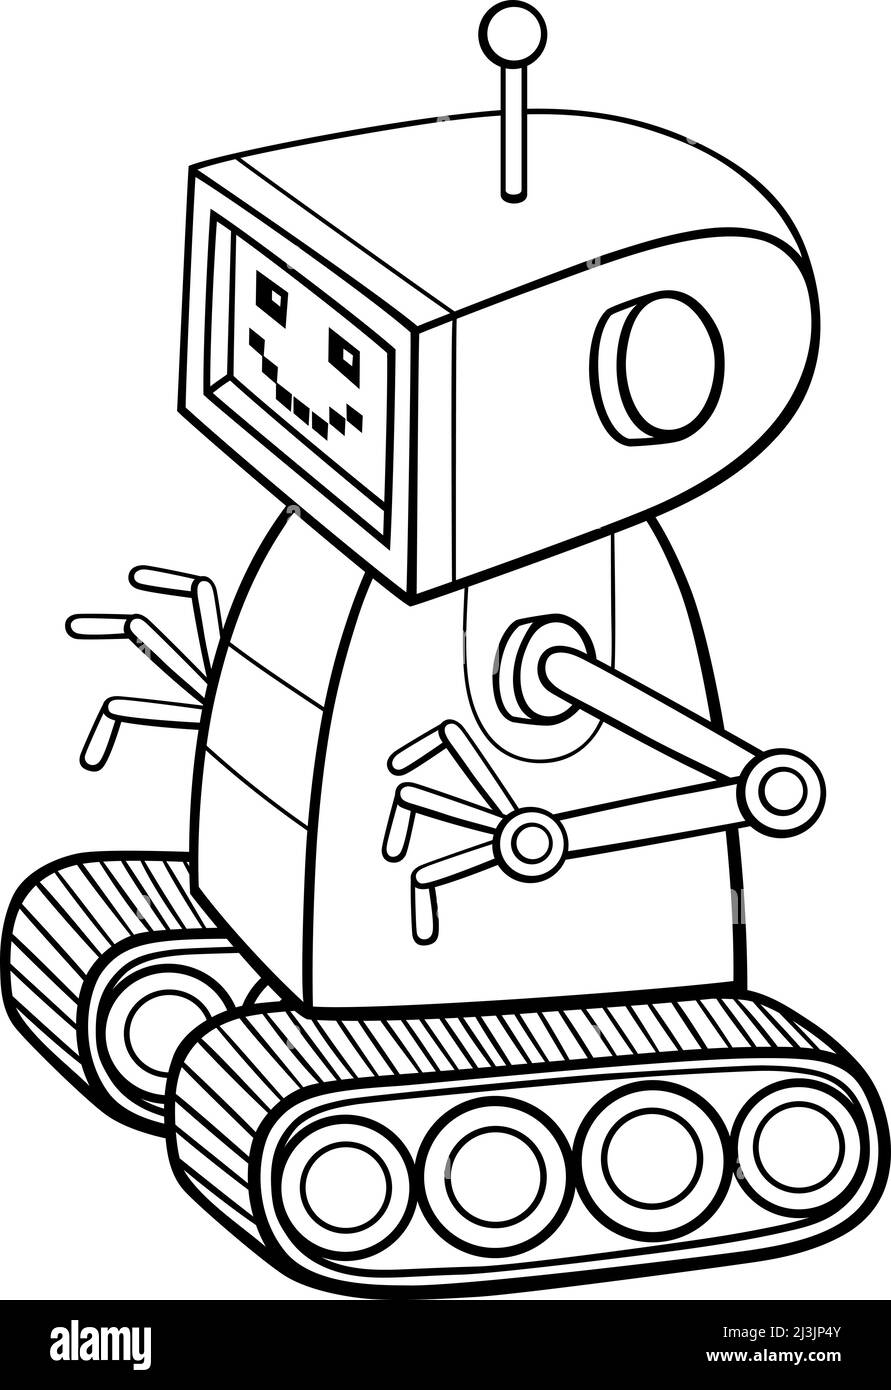 How To Draw a Simple Robot Toy - Rainbow Printables